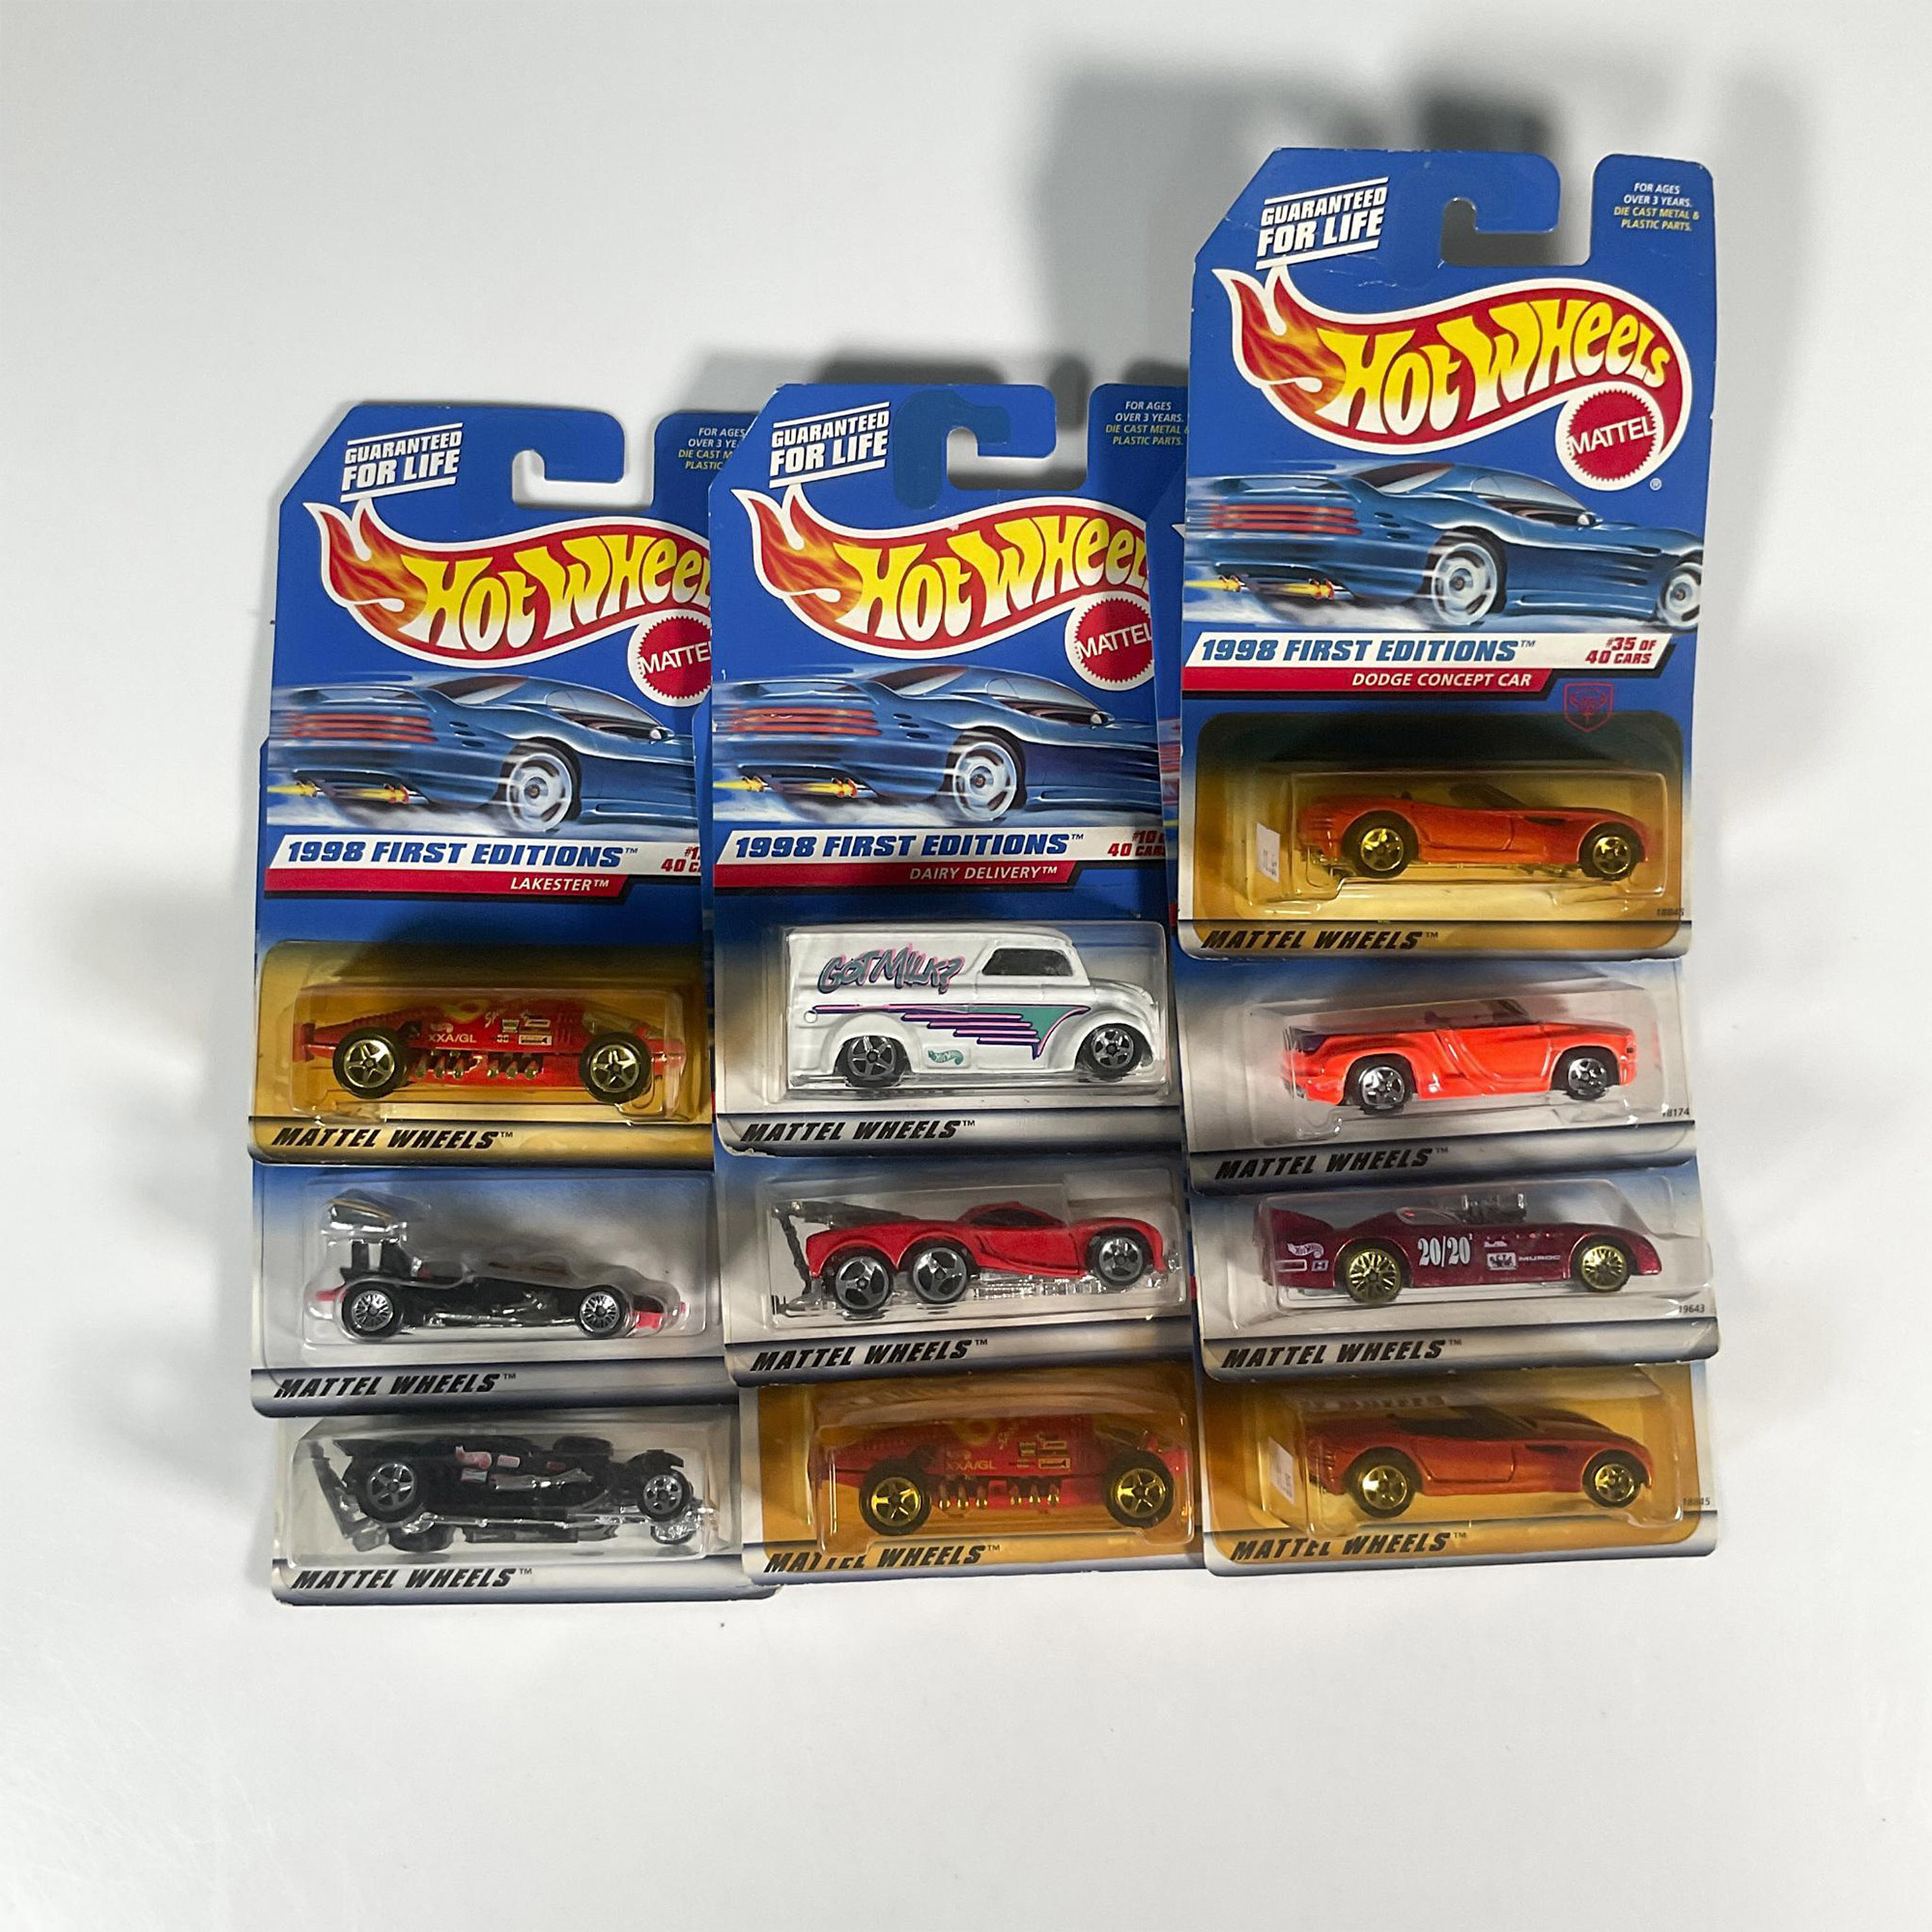 10pc 1998 First Ed. Hot Wheels Toy Cars